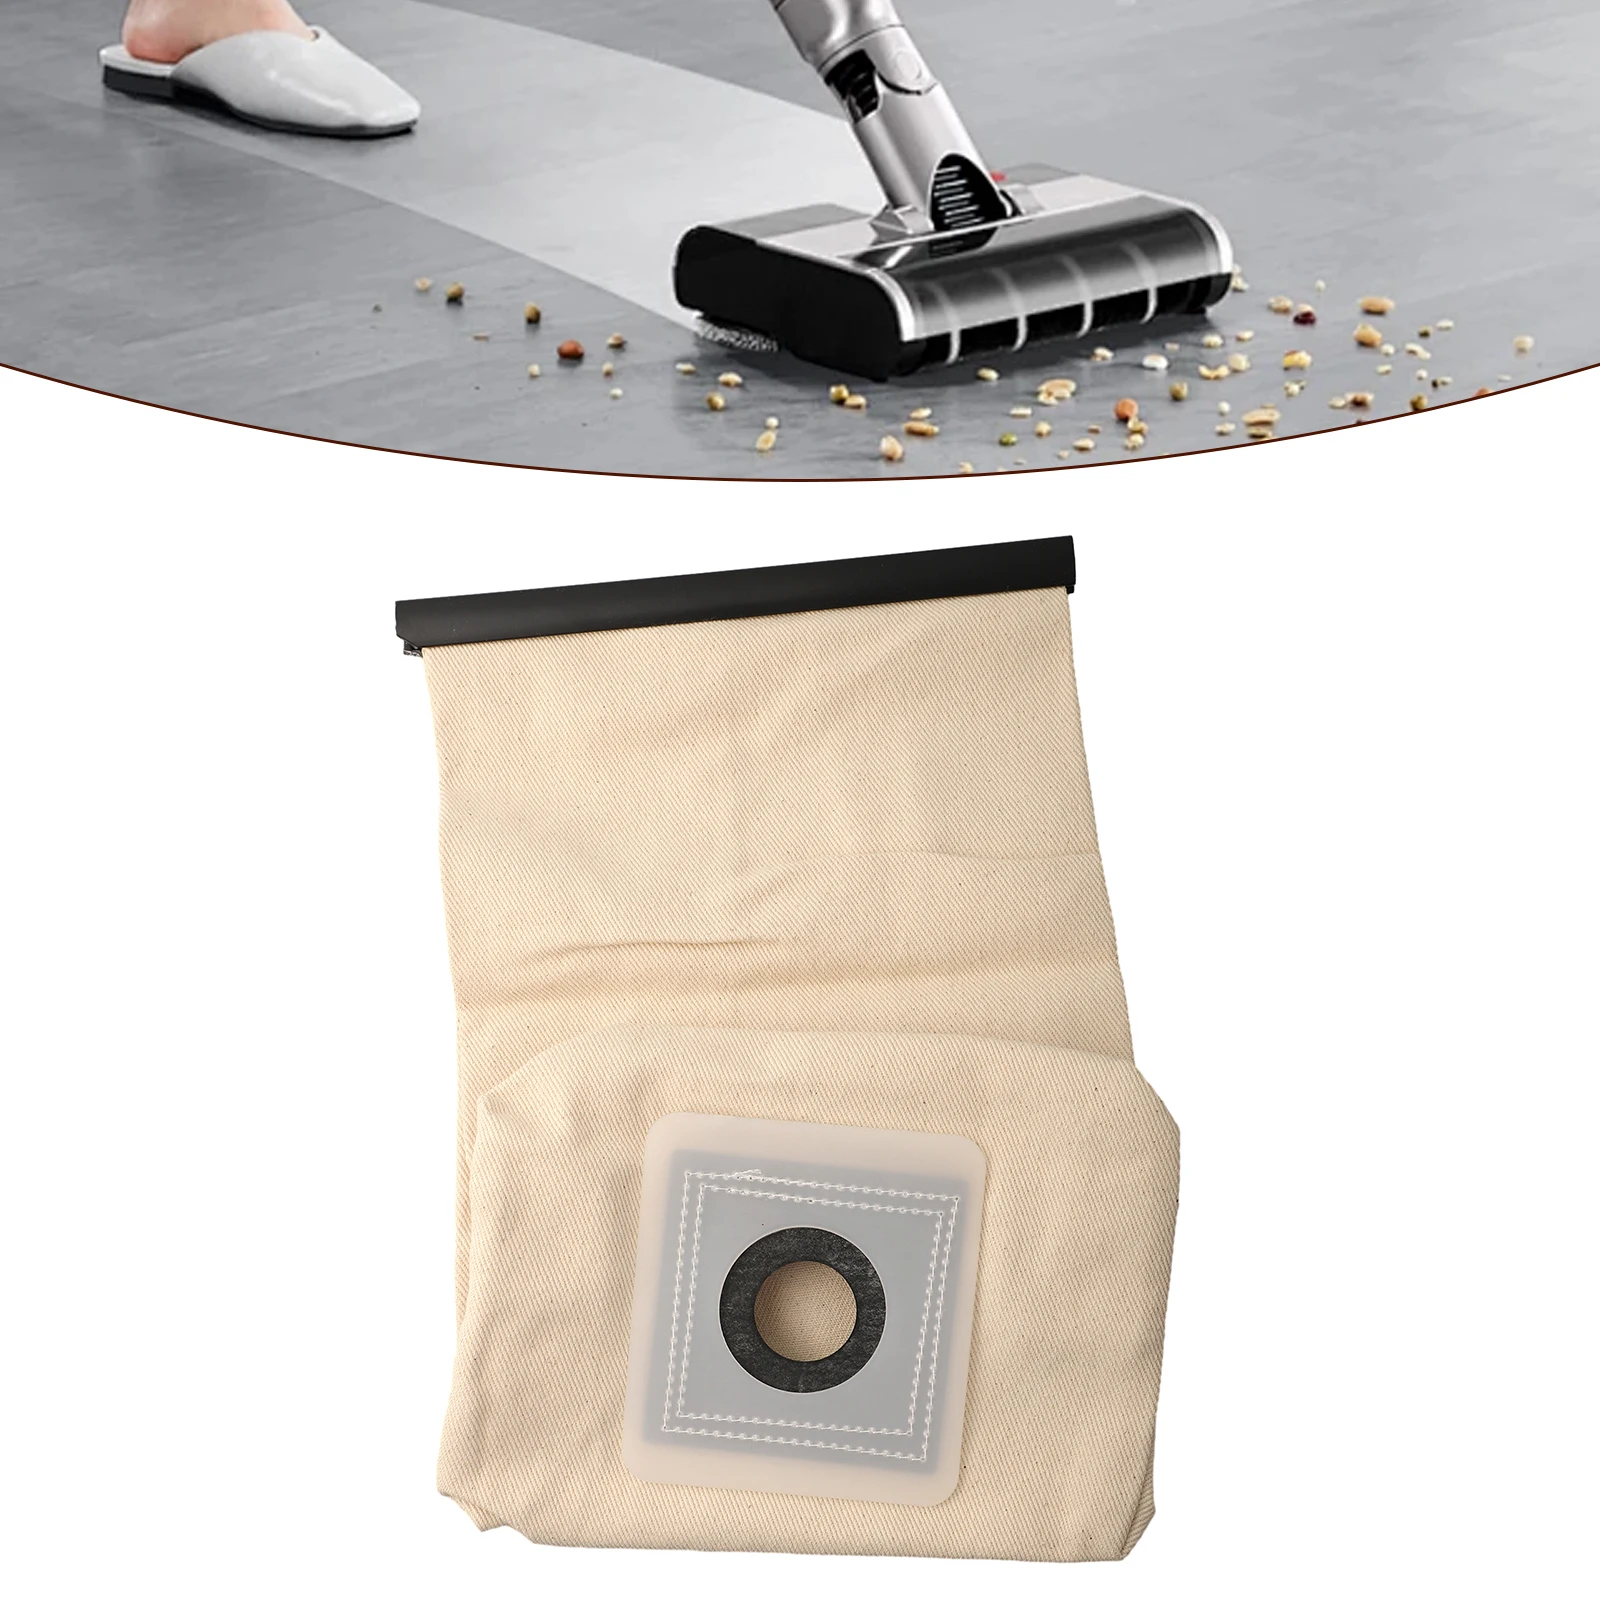 Vacuum Bags Dust Bag Reusable 95332110 9.533-211.0 Cleaning Tool For Hoover Filter Non-woven Dust Bag For Karcher vacuum bags dust bag reusable sweeper parts 1pc 95332110 9 533 211 0 cleaning tool karcher t7 1 t9 1 t10 1 t12 1 for karcher